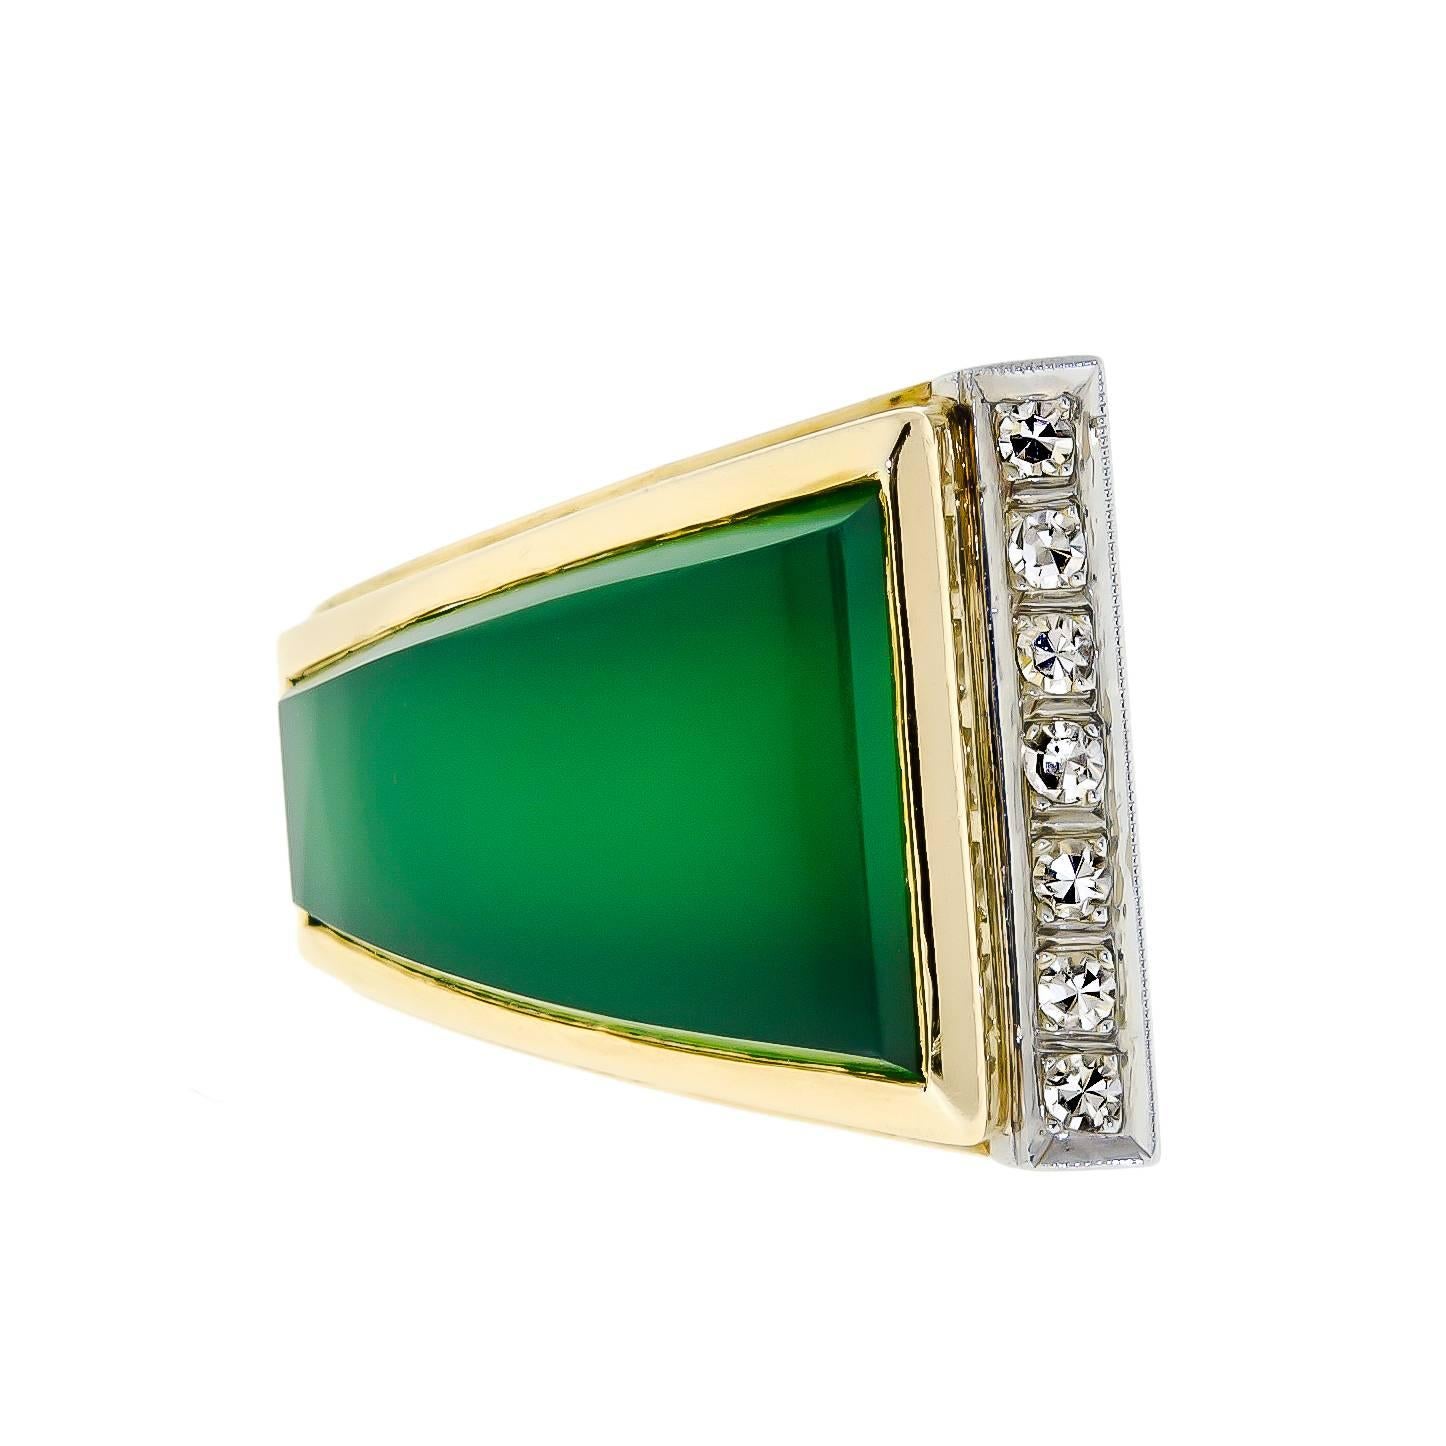 Exquisite Retro chrysoprase diamond and 18k yellow gold ring - fantastic abstract design heavy 18k yellow gold mount - 7 small single cut diamonds. Circa 1940 Size 6.25 currently Measures approx. 1 inch across the ring and 3/4 inch in